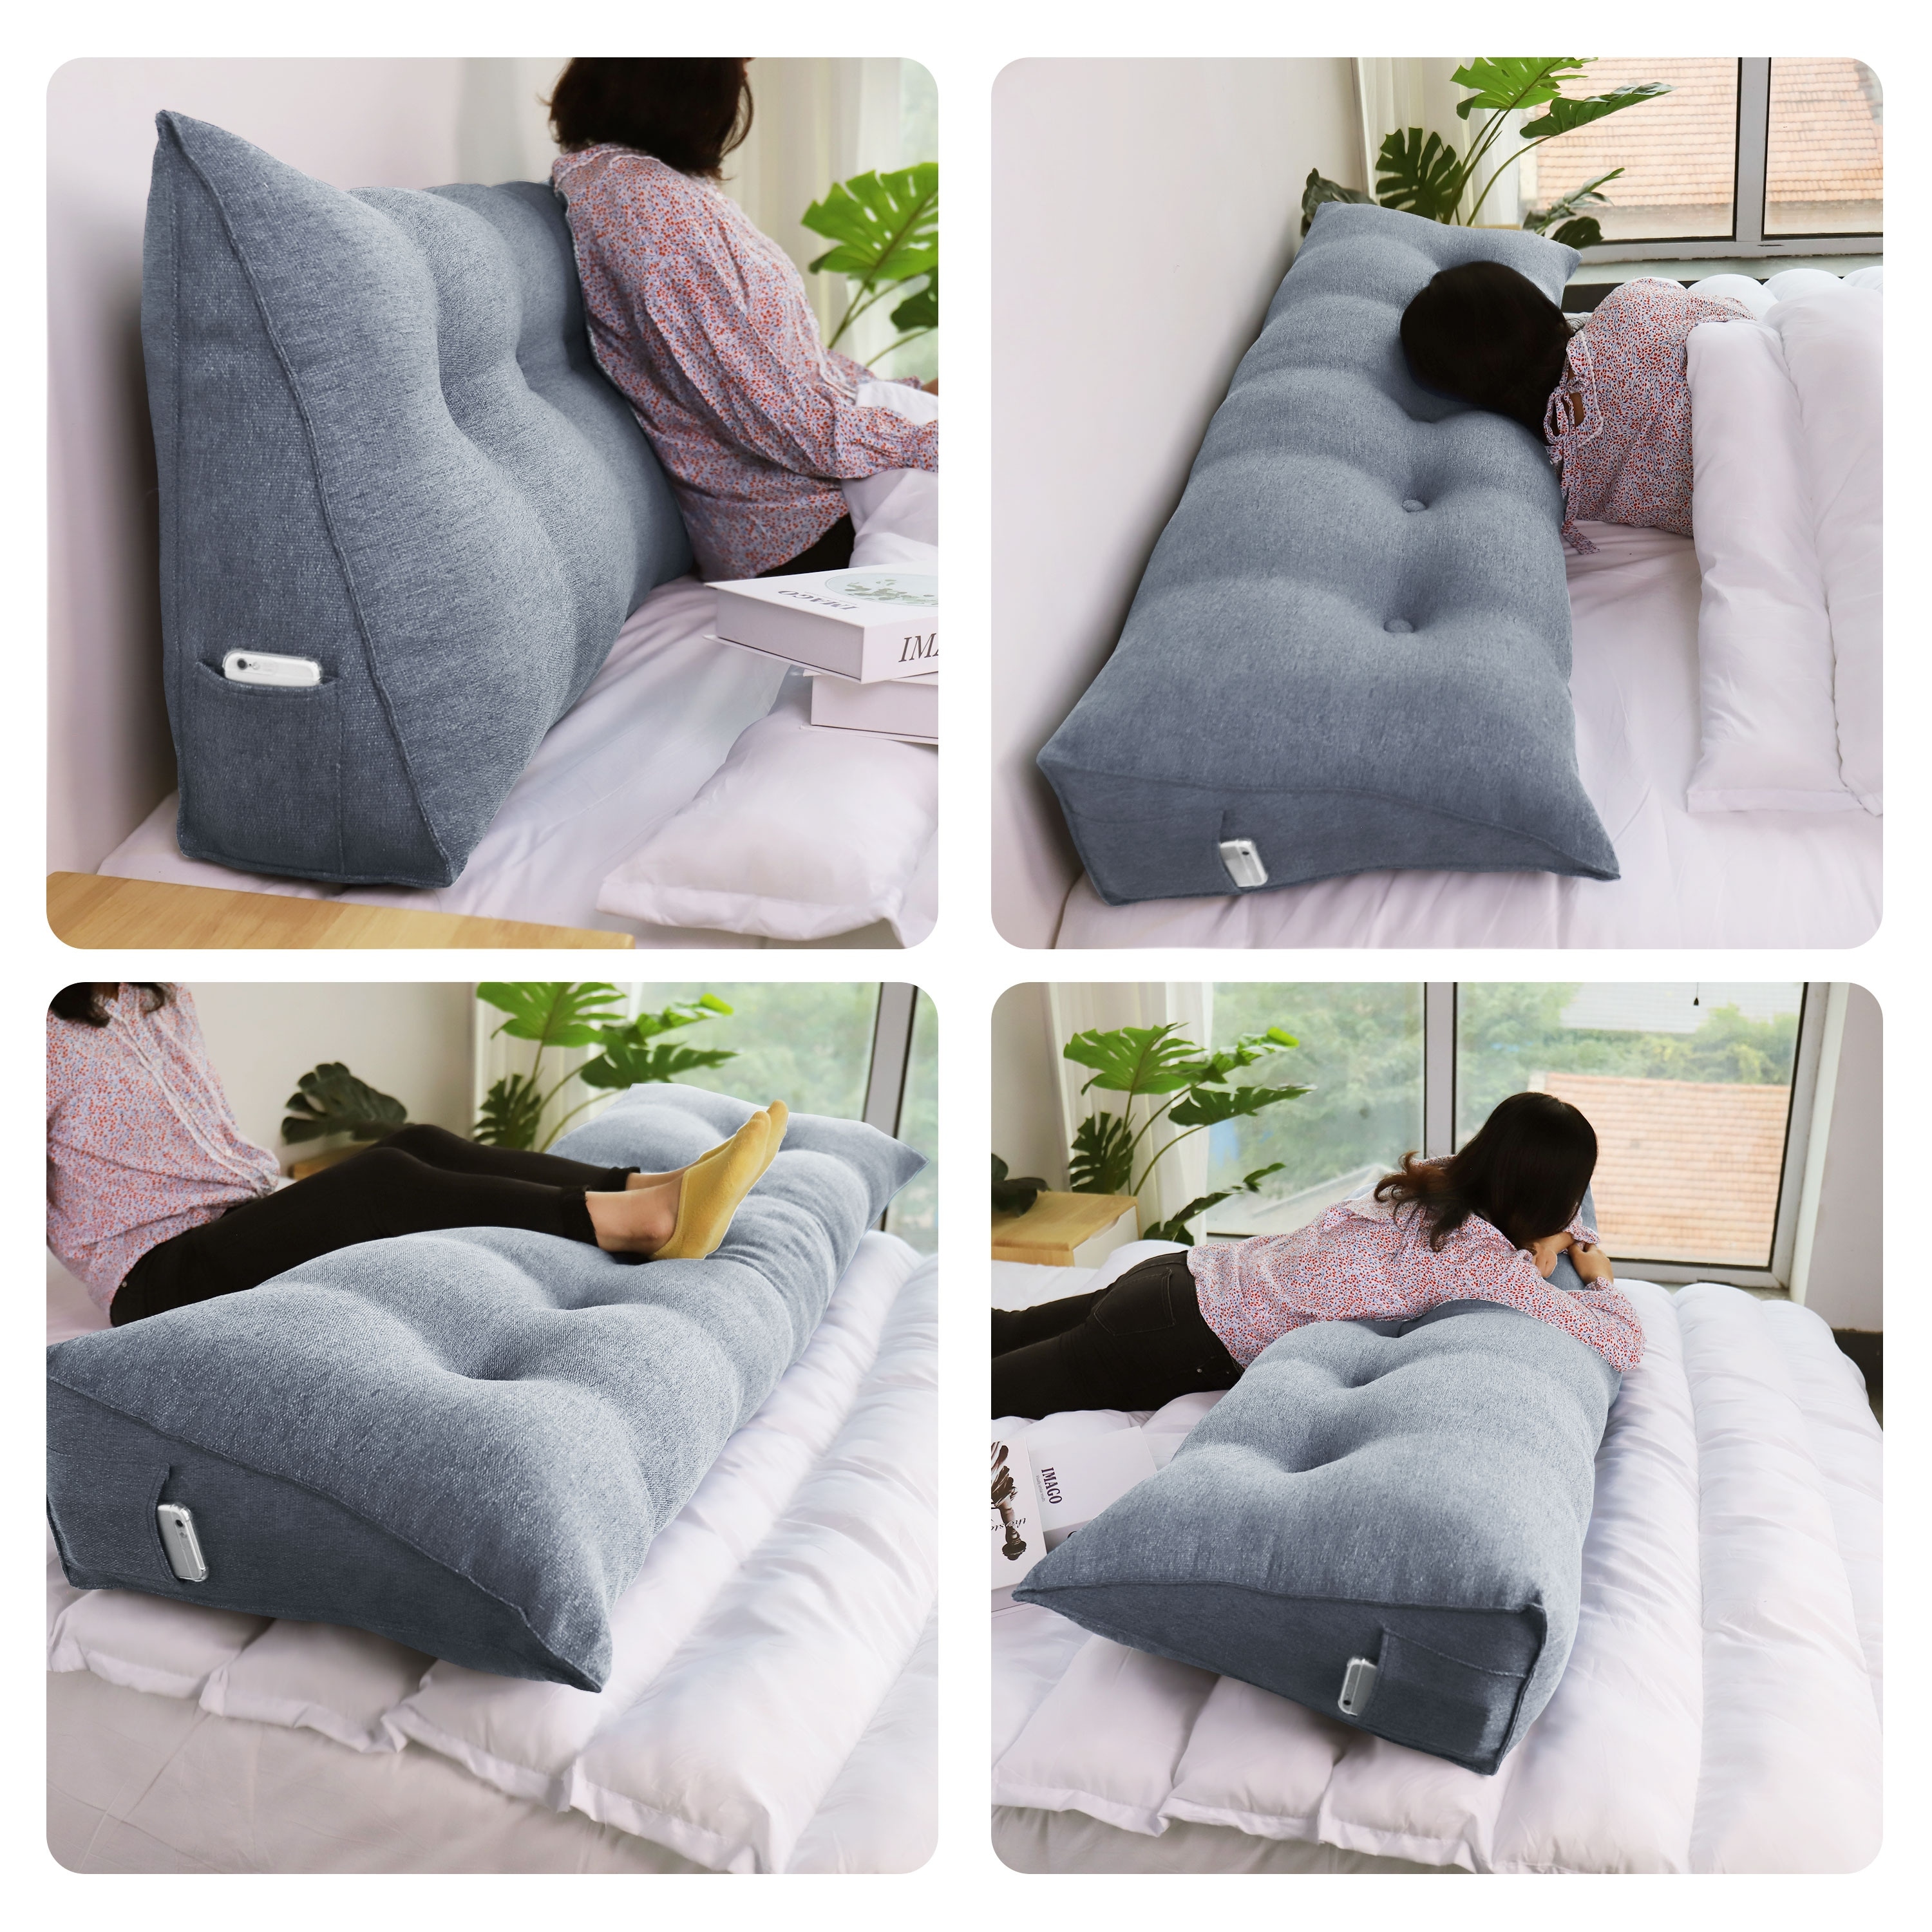 Reading Bed Rest Pillow Sitting Up In Bed Back Support Cushion